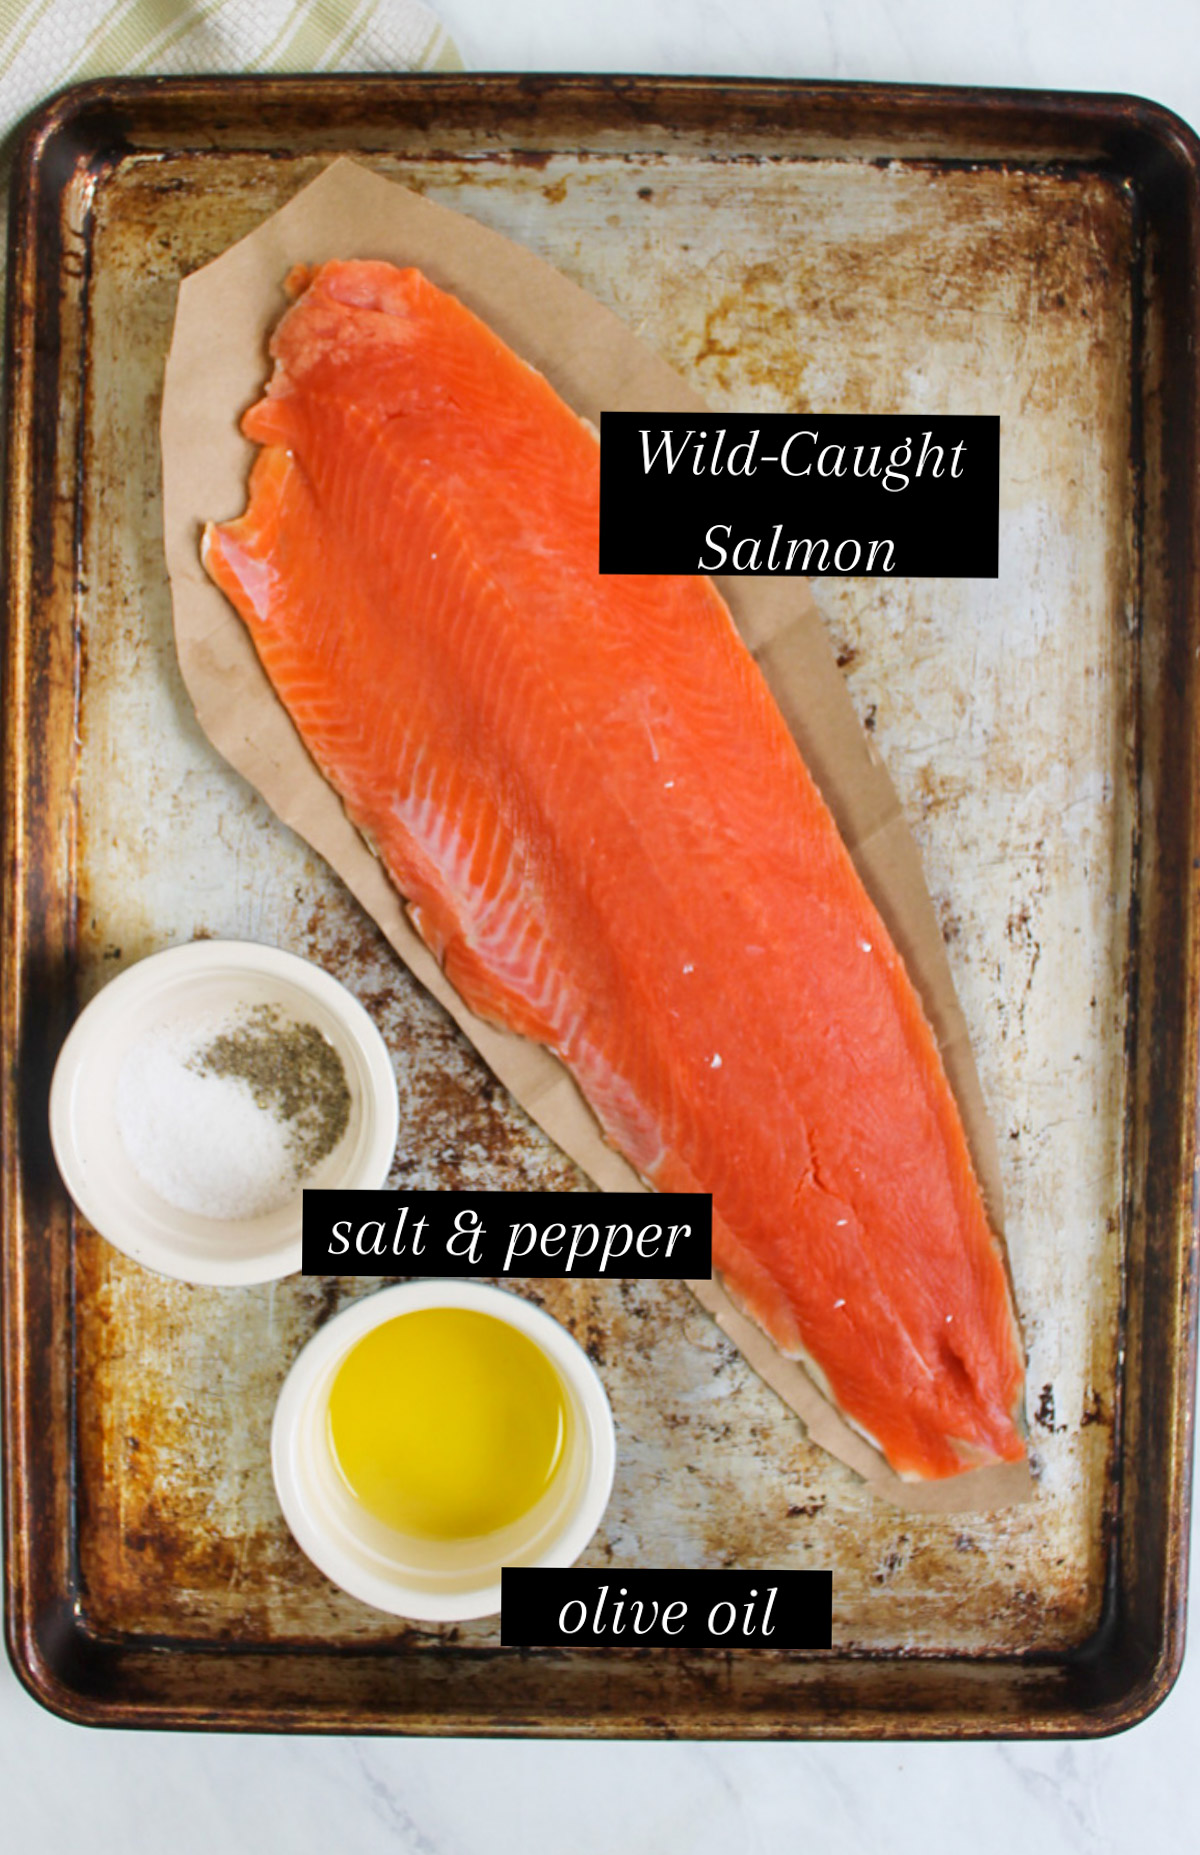 Labeled ingredients for Simple Roasted Wild Caught Salmon.